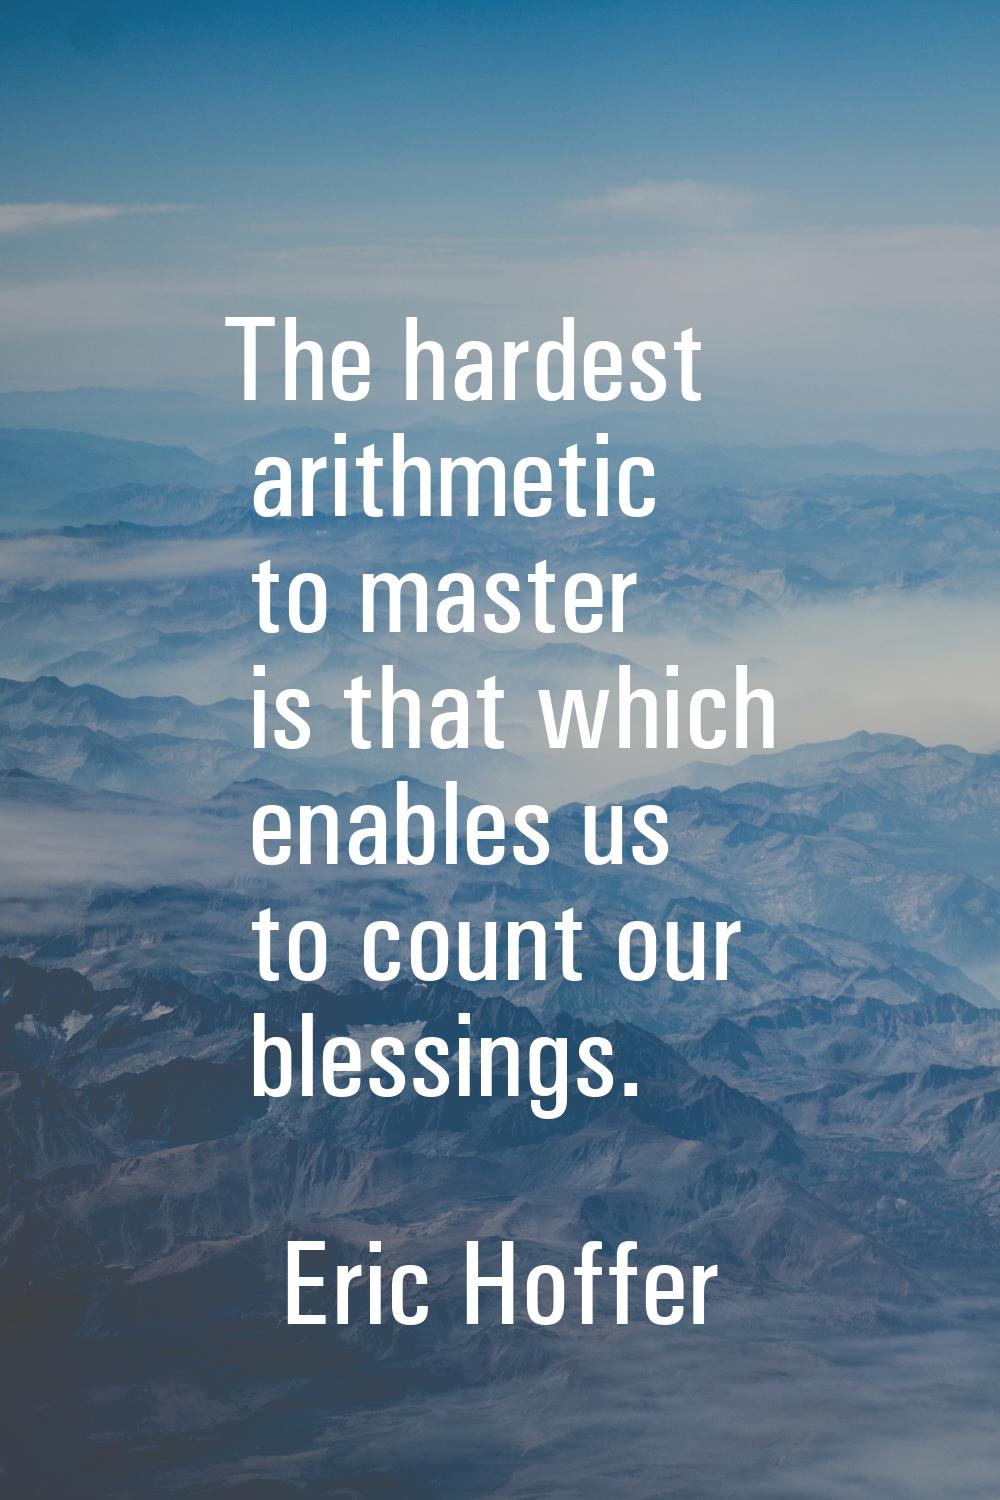 The hardest arithmetic to master is that which enables us to count our blessings.